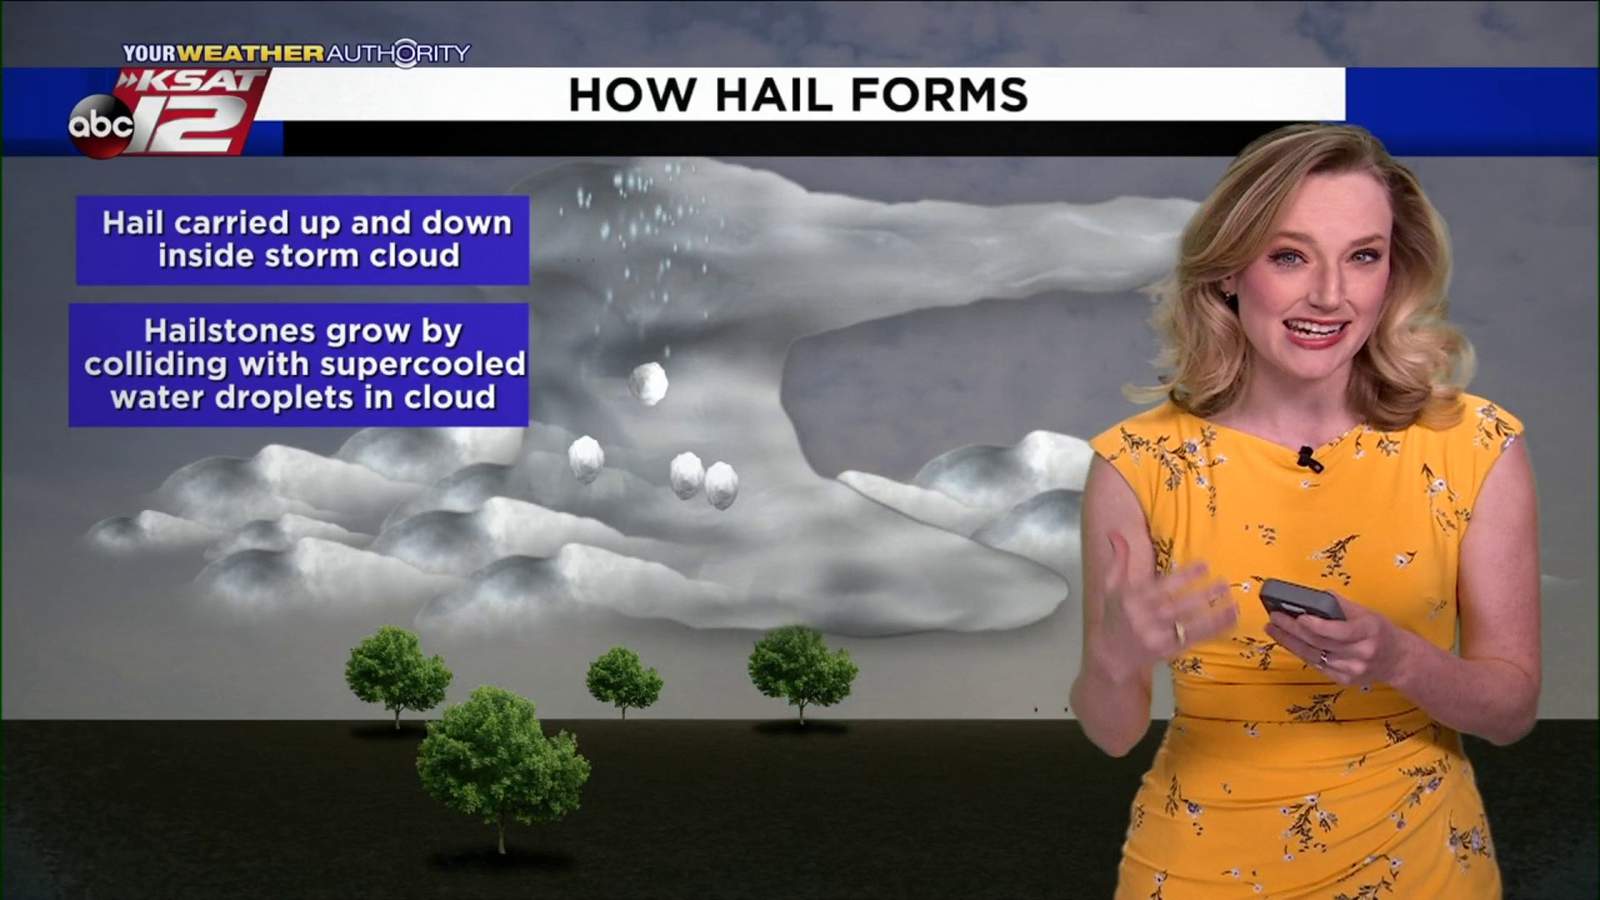 Got hail? Here's the science behind how hail forms